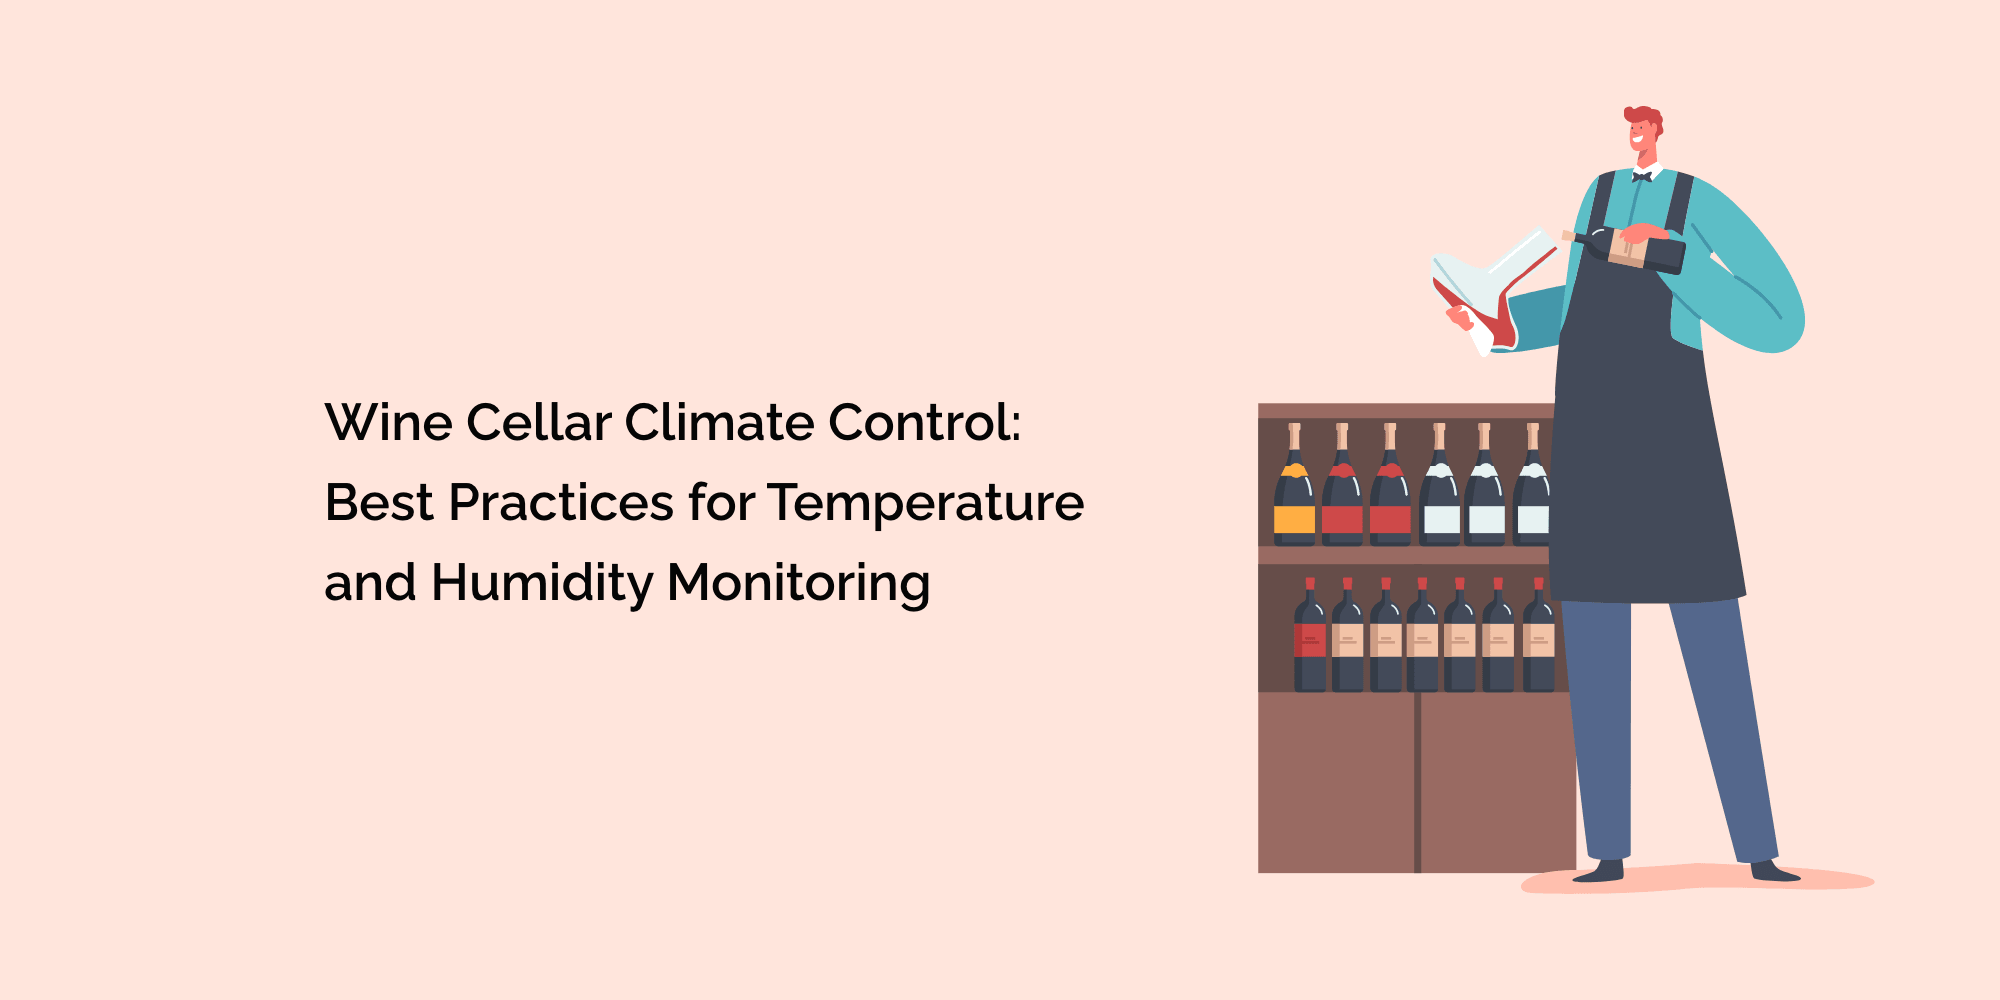 Wine Cellar Climate Control: Best Practices for Temperature and Humidity Monitoring